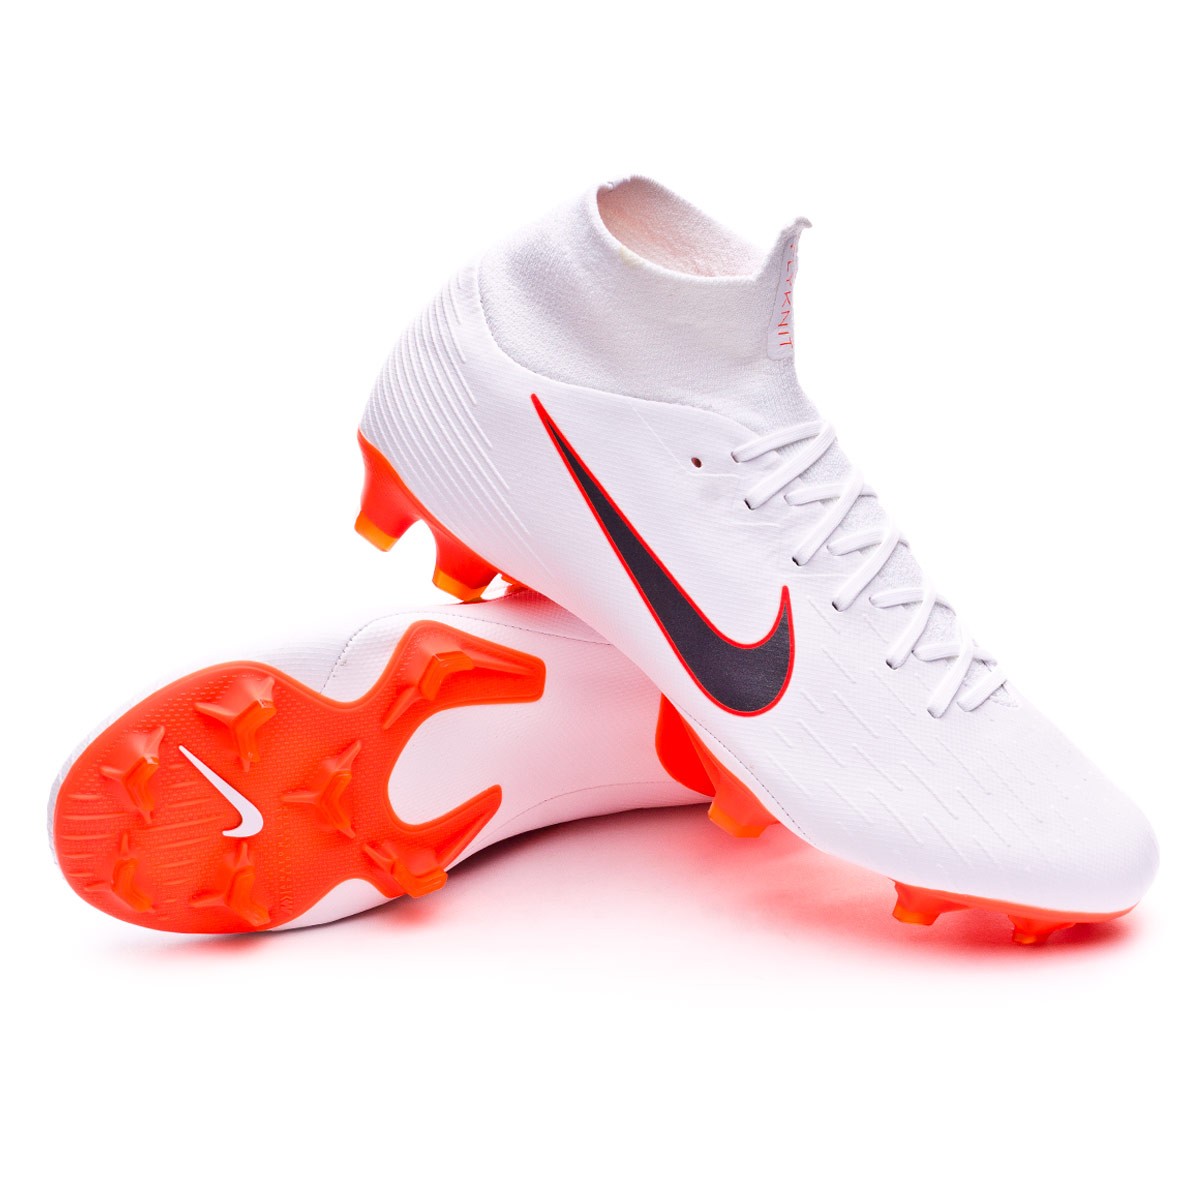 HOW THEY FIT Nike Mercurial Superfly 7 Elite SG PRO.